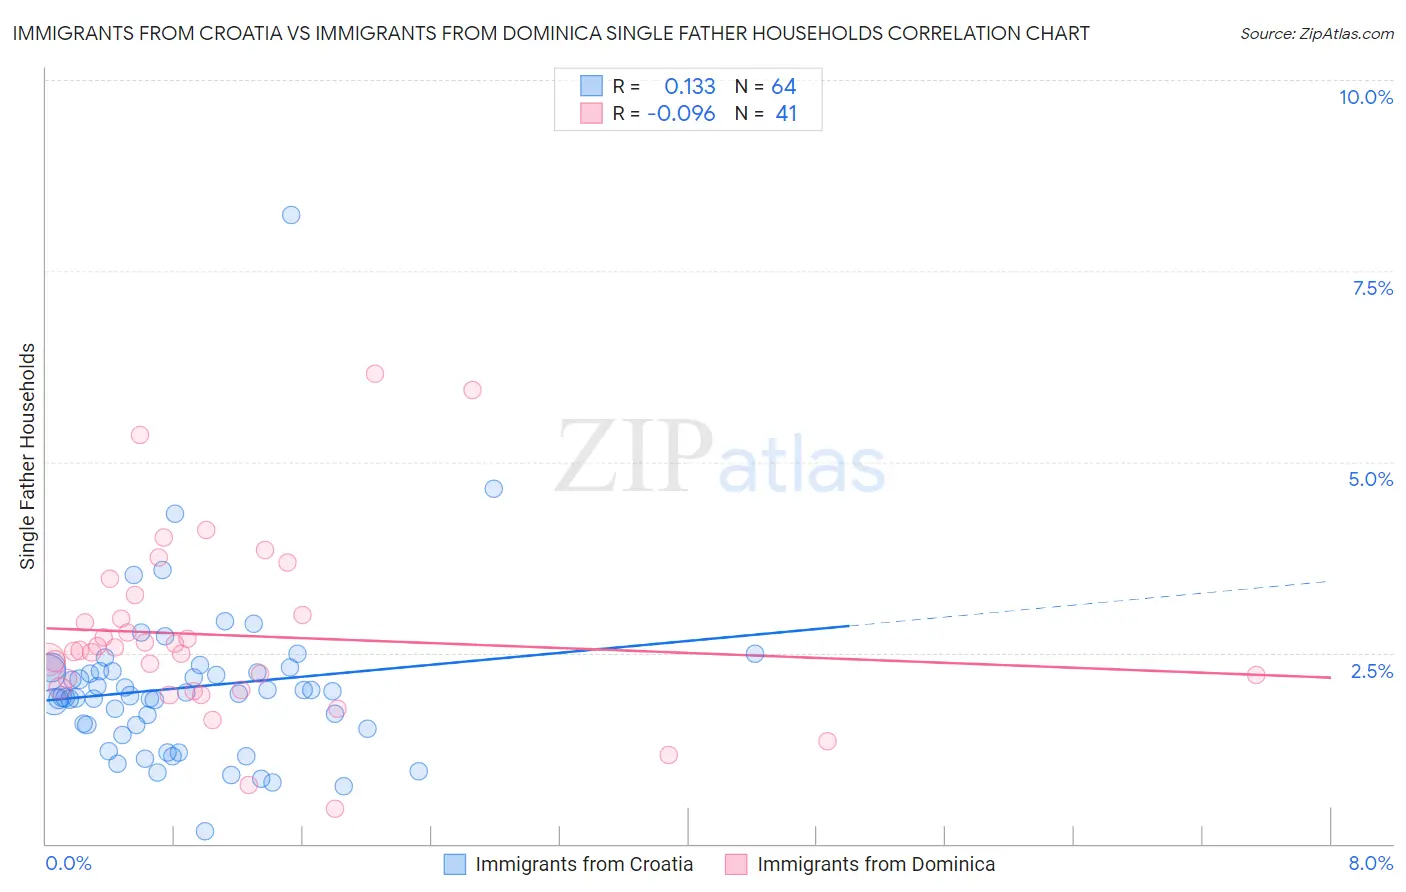 Immigrants from Croatia vs Immigrants from Dominica Single Father Households